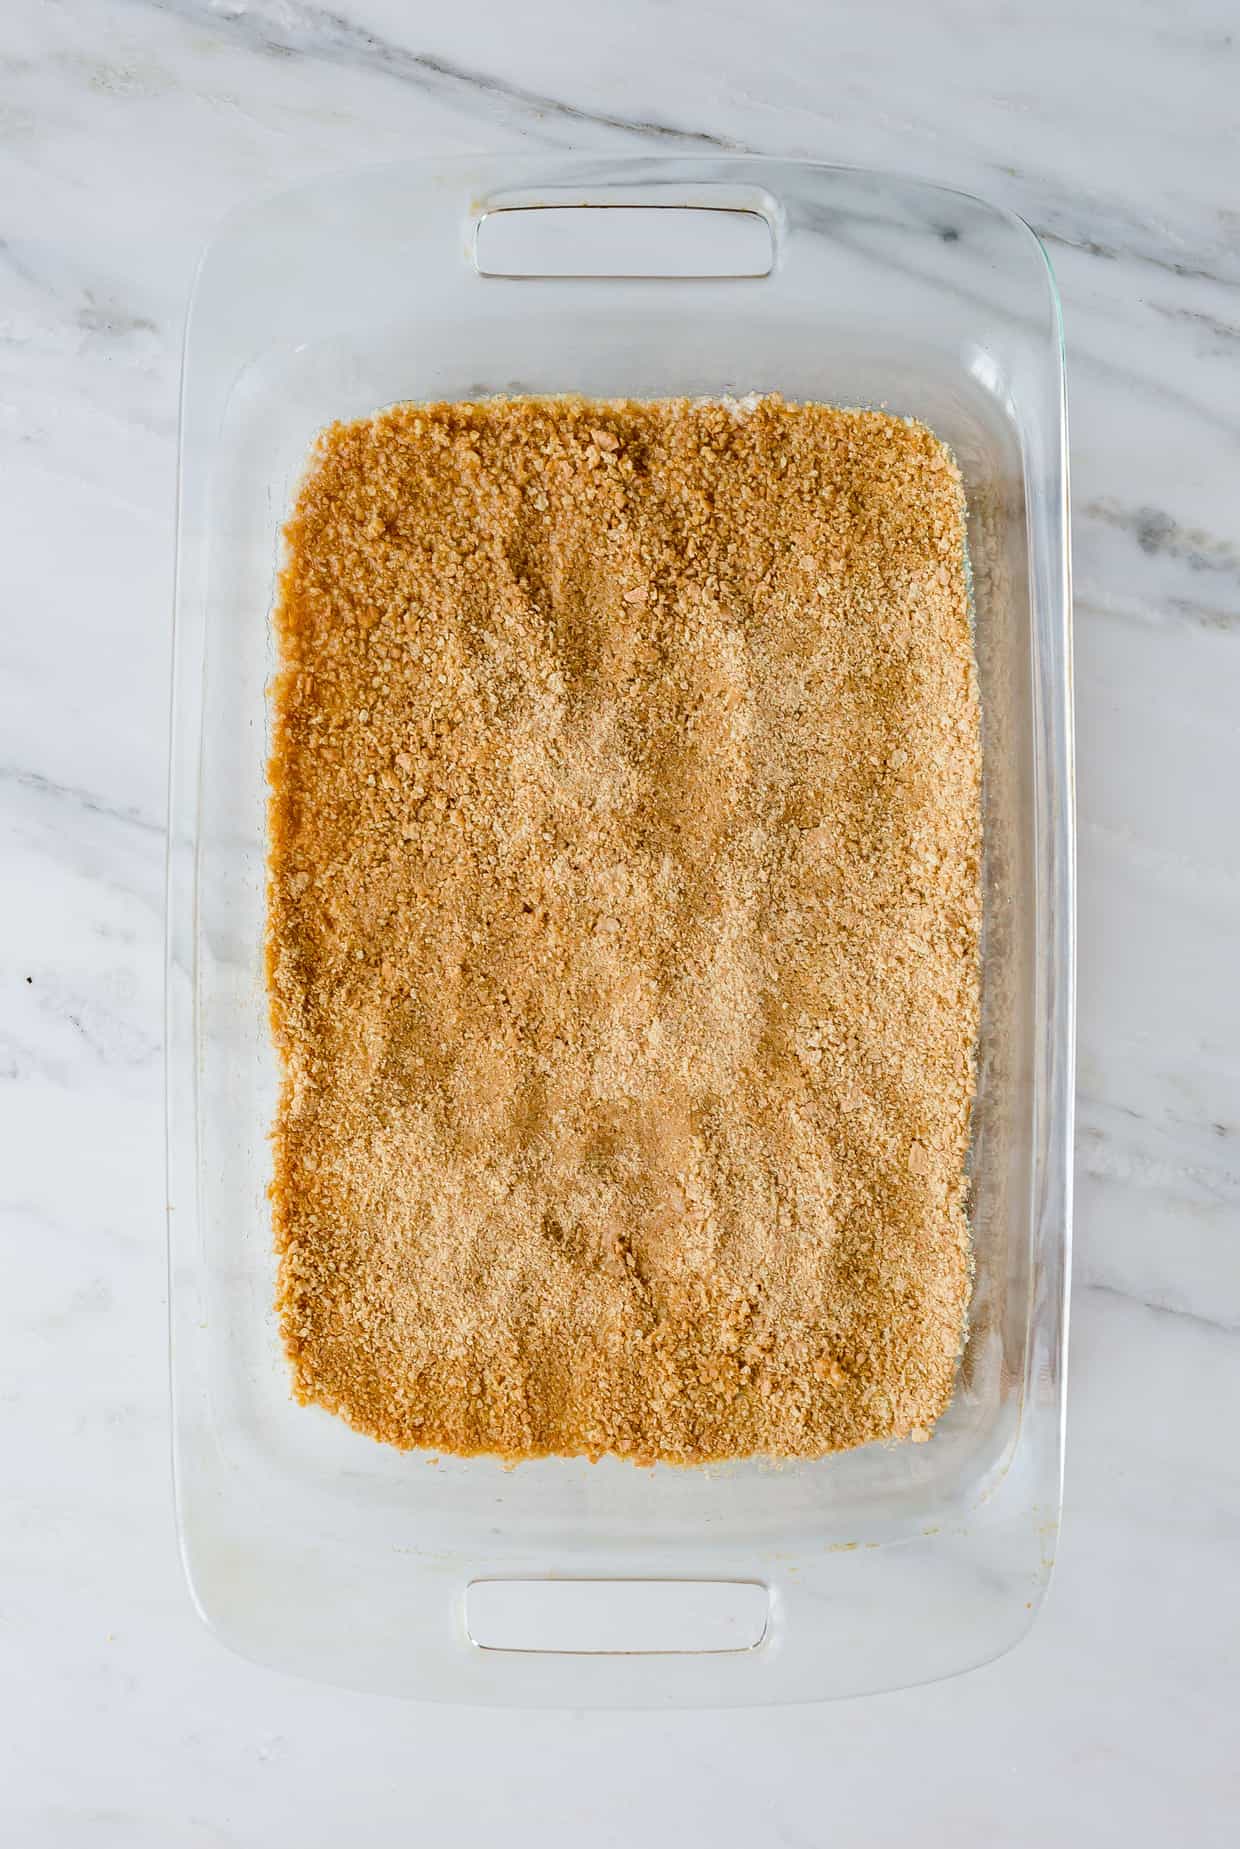 A graham cracker crust filling the bottom of a 9 x 13 inch pan for 7 Layer Bars.